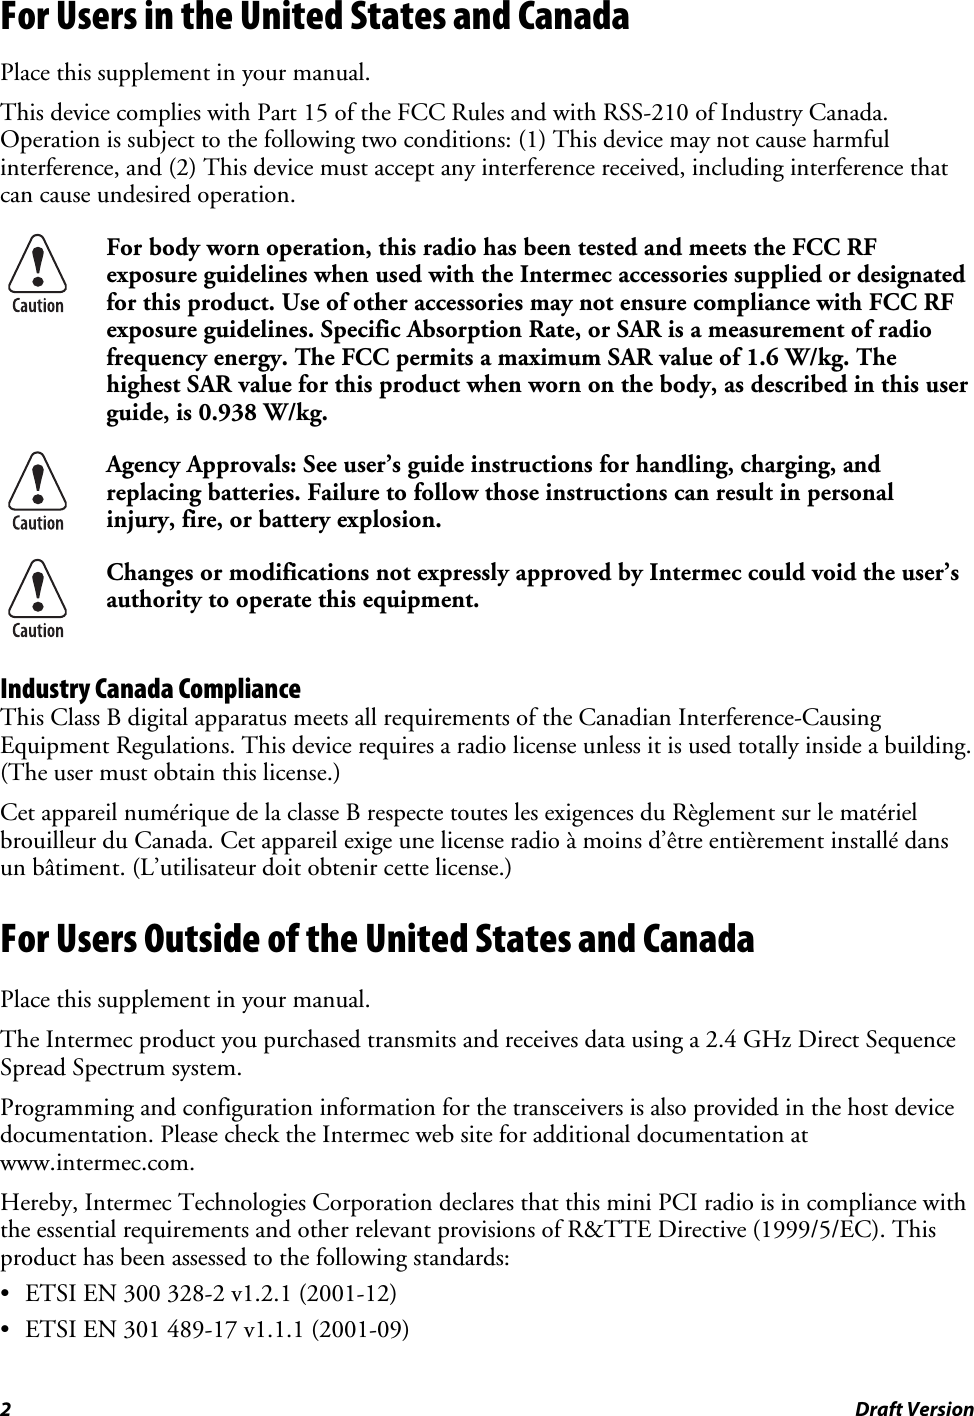 2  Draft Version For Users in the United States and Canada Place this supplement in your manual. This device complies with Part 15 of the FCC Rules and with RSS-210 of Industry Canada. Operation is subject to the following two conditions: (1) This device may not cause harmful interference, and (2) This device must accept any interference received, including interference that can cause undesired operation.  For body worn operation, this radio has been tested and meets the FCC RF exposure guidelines when used with the Intermec accessories supplied or designated for this product. Use of other accessories may not ensure compliance with FCC RF exposure guidelines. Specific Absorption Rate, or SAR is a measurement of radio frequency energy. The FCC permits a maximum SAR value of 1.6 W/kg. The highest SAR value for this product when worn on the body, as described in this user guide, is 0.938 W/kg.  Agency Approvals: See user’s guide instructions for handling, charging, and replacing batteries. Failure to follow those instructions can result in personal injury, fire, or battery explosion.  Changes or modifications not expressly approved by Intermec could void the user’s authority to operate this equipment. Industry Canada Compliance This Class B digital apparatus meets all requirements of the Canadian Interference-Causing Equipment Regulations. This device requires a radio license unless it is used totally inside a building. (The user must obtain this license.) Cet appareil numérique de la classe B respecte toutes les exigences du Règlement sur le matériel brouilleur du Canada. Cet appareil exige une license radio à moins d’être entièrement installé dans un bâtiment. (L’utilisateur doit obtenir cette license.) For Users Outside of the United States and Canada Place this supplement in your manual. The Intermec product you purchased transmits and receives data using a 2.4 GHz Direct Sequence Spread Spectrum system. Programming and configuration information for the transceivers is also provided in the host device documentation. Please check the Intermec web site for additional documentation at www.intermec.com. Hereby, Intermec Technologies Corporation declares that this mini PCI radio is in compliance with the essential requirements and other relevant provisions of R&amp;TTE Directive (1999/5/EC). This product has been assessed to the following standards: • ETSI EN 300 328-2 v1.2.1 (2001-12) • ETSI EN 301 489-17 v1.1.1 (2001-09) 